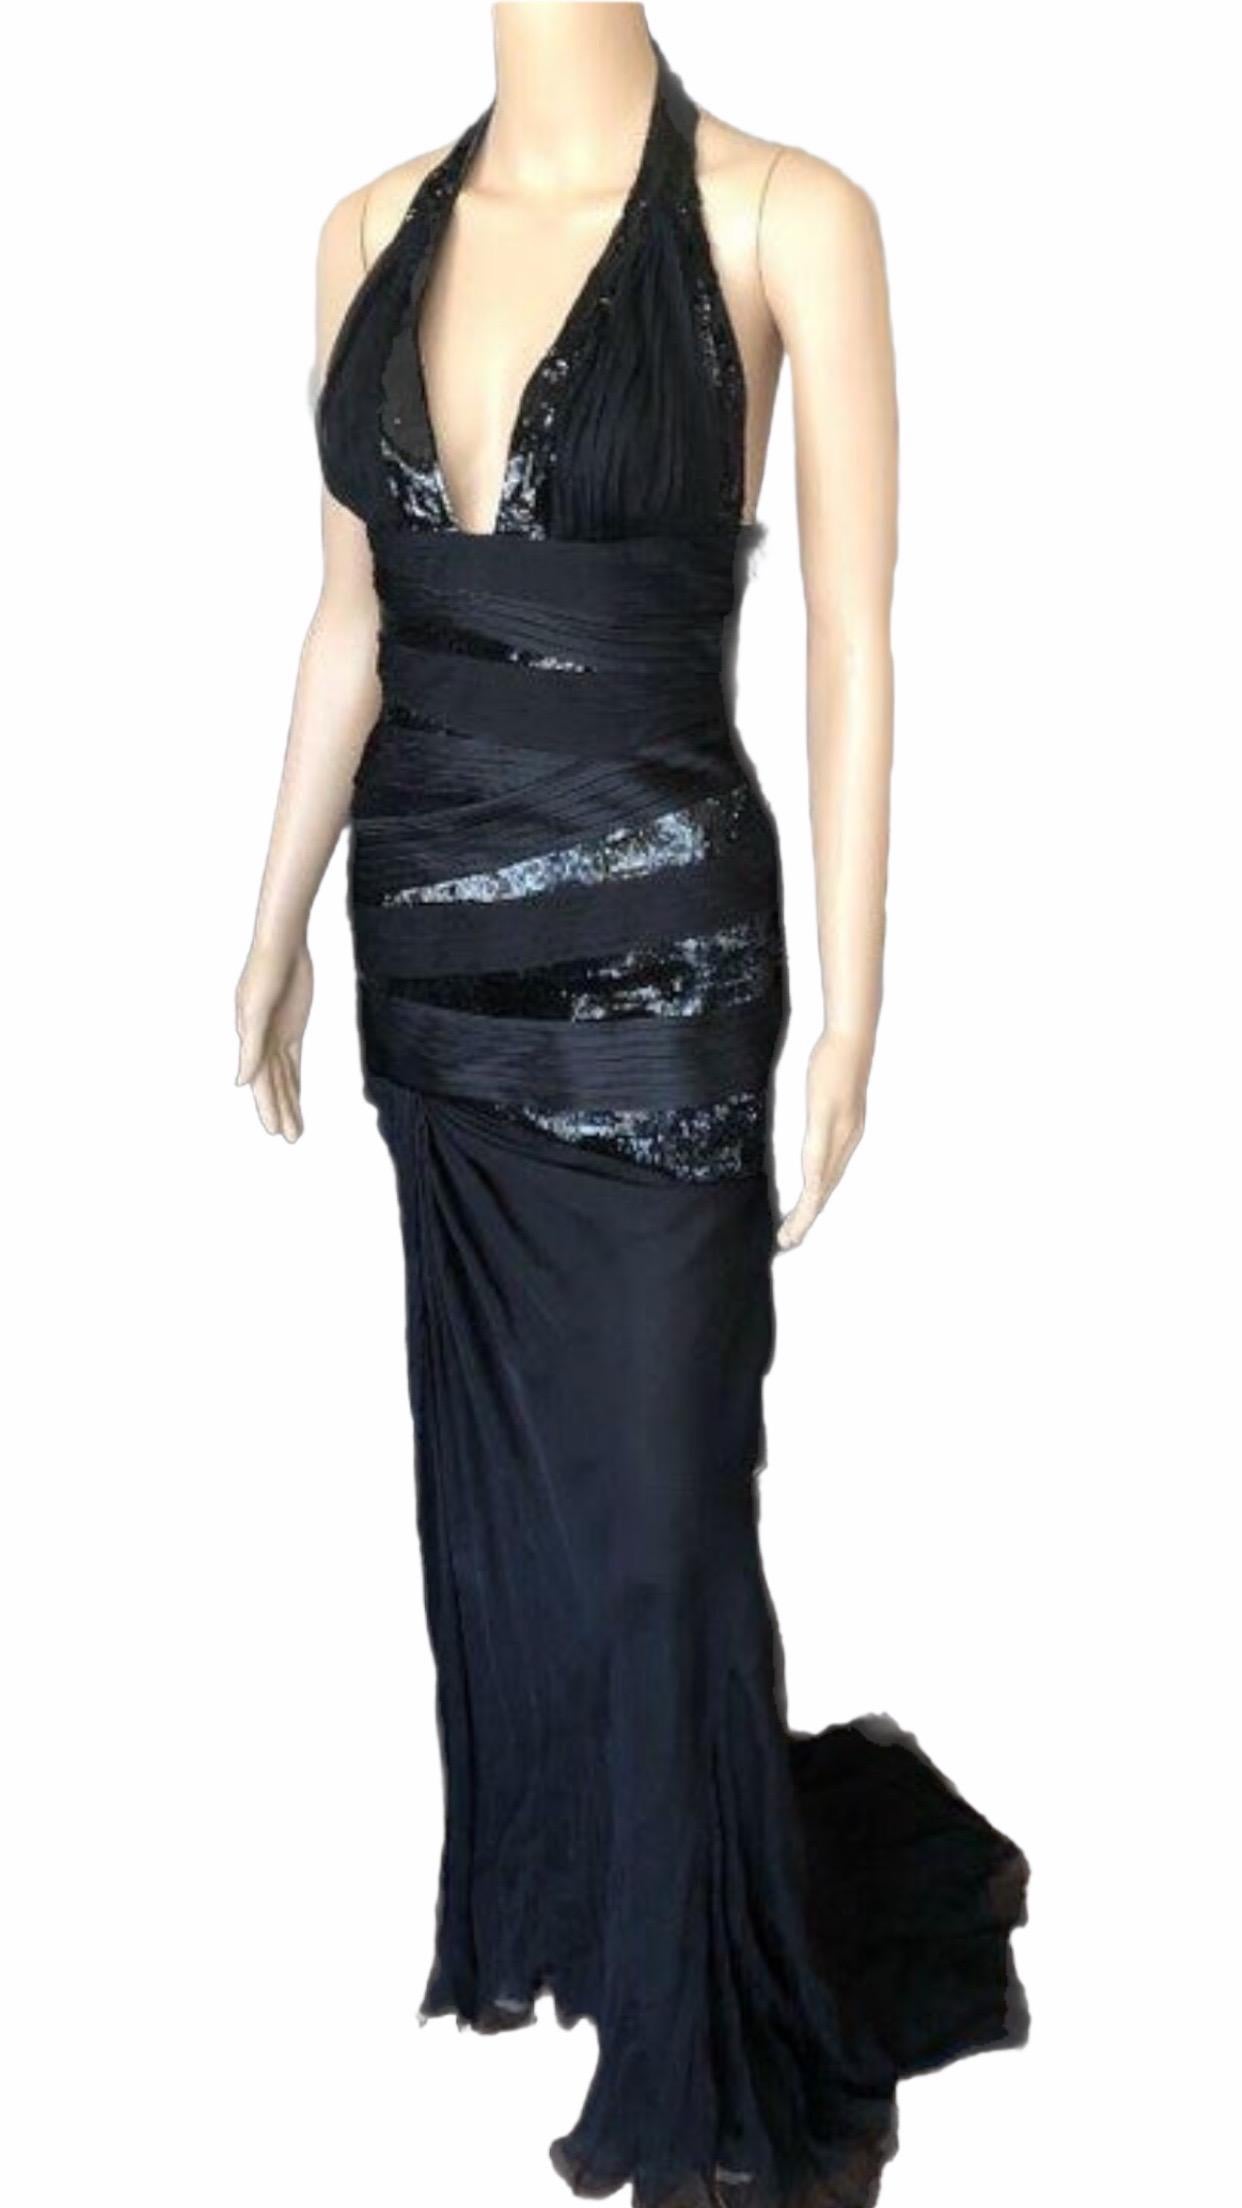 Versace $20, 905 F/W 2006 Runway Black Plunging Neckline Embellished Dress Gown  In Good Condition For Sale In Naples, FL